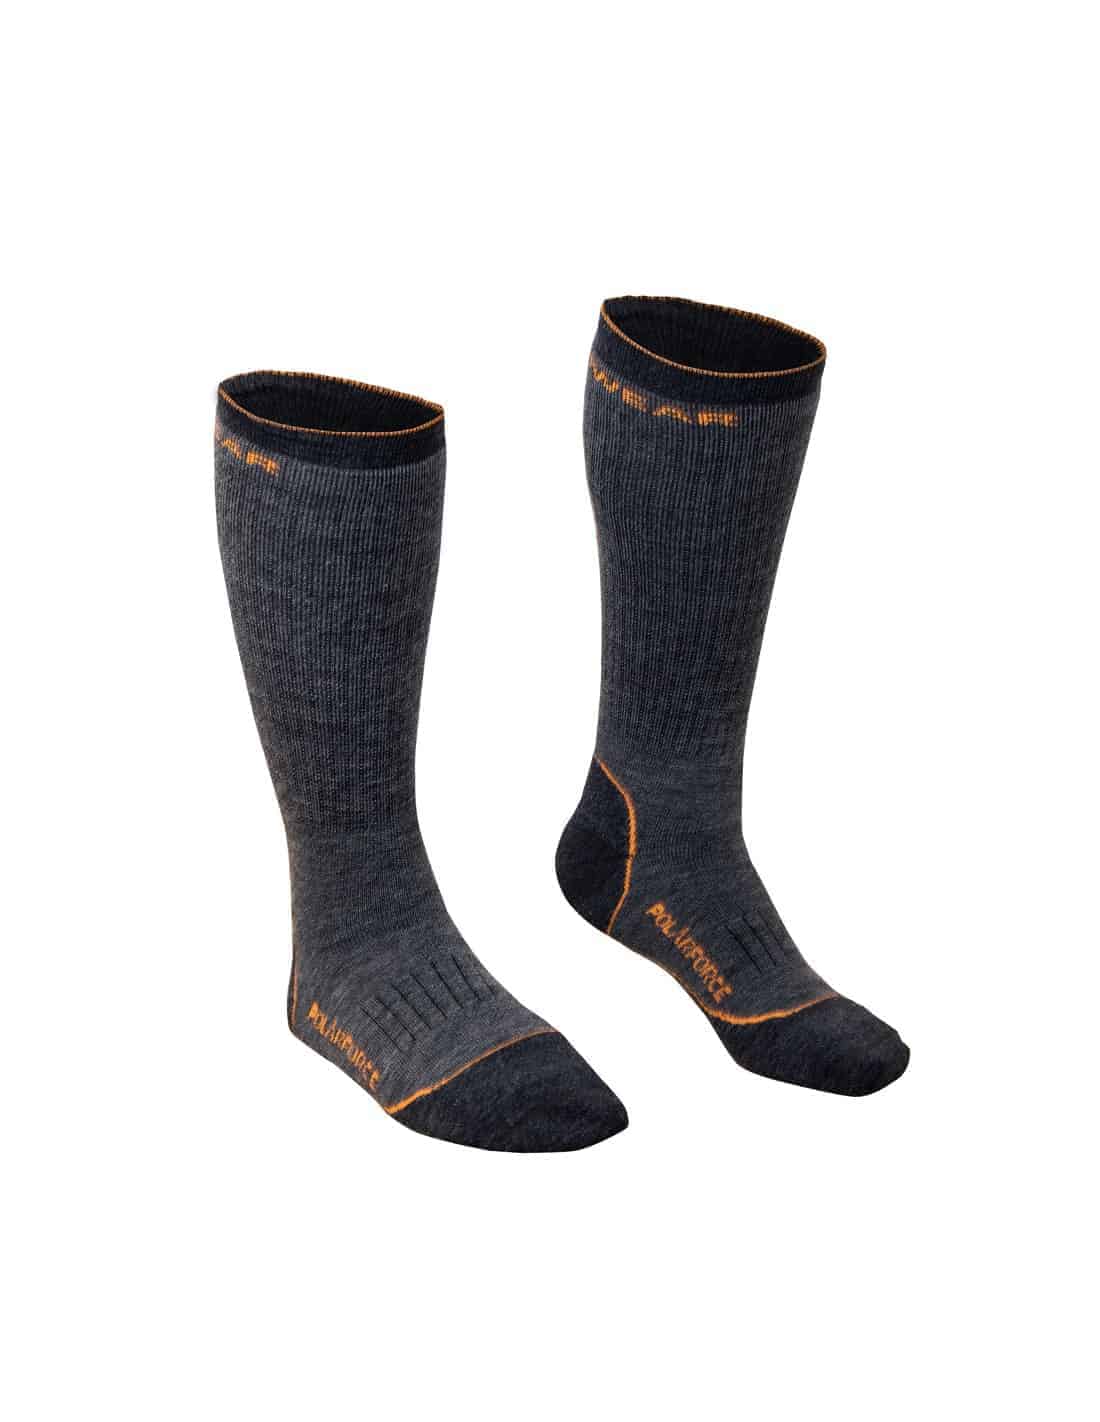 Rywan - Chaussette polaire - Chaussettes outdoor hiver - Inuka